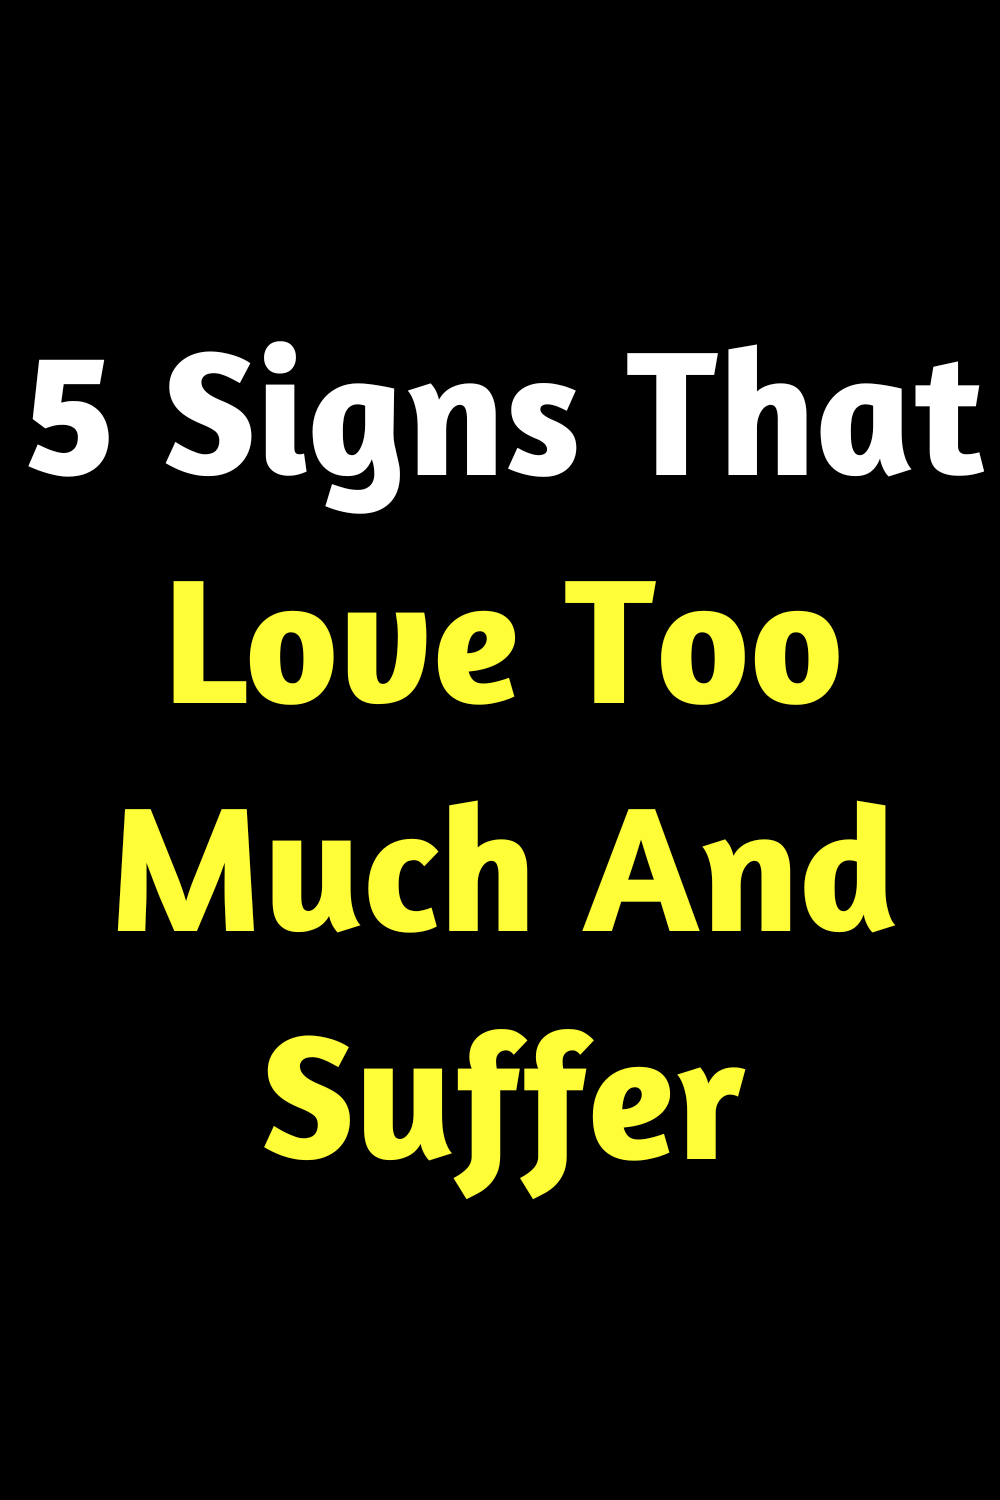 5 Signs That Love Too Much And Suffer